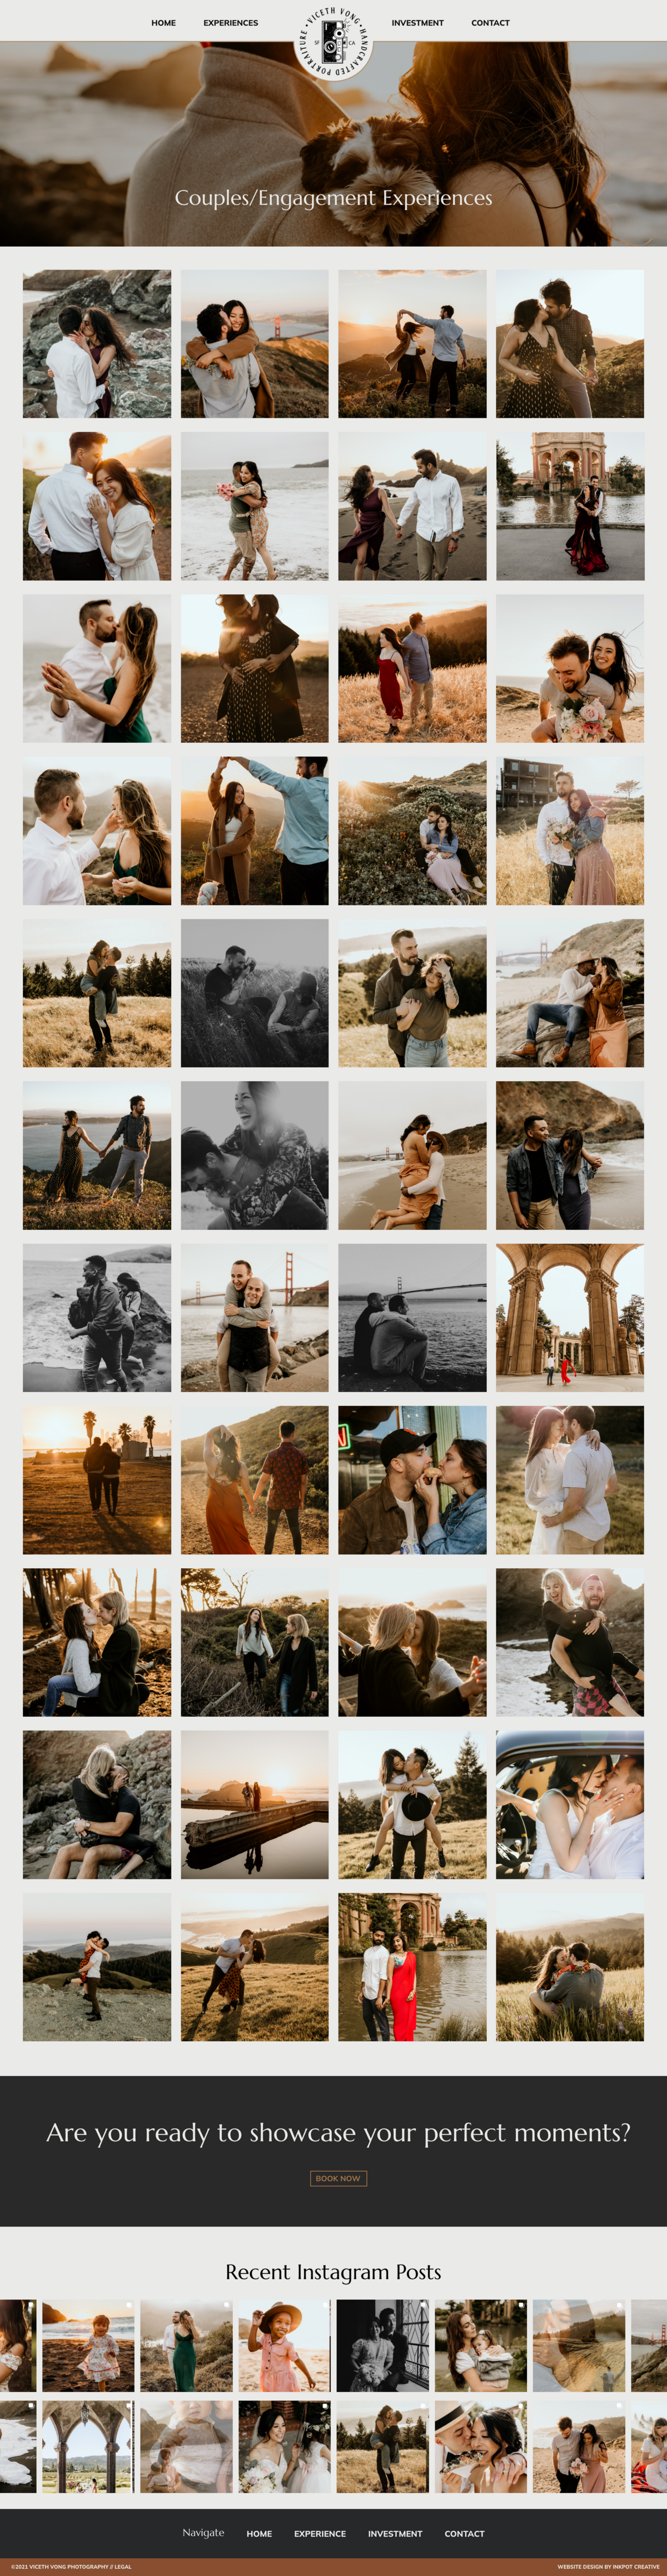 screenshot of full couples page